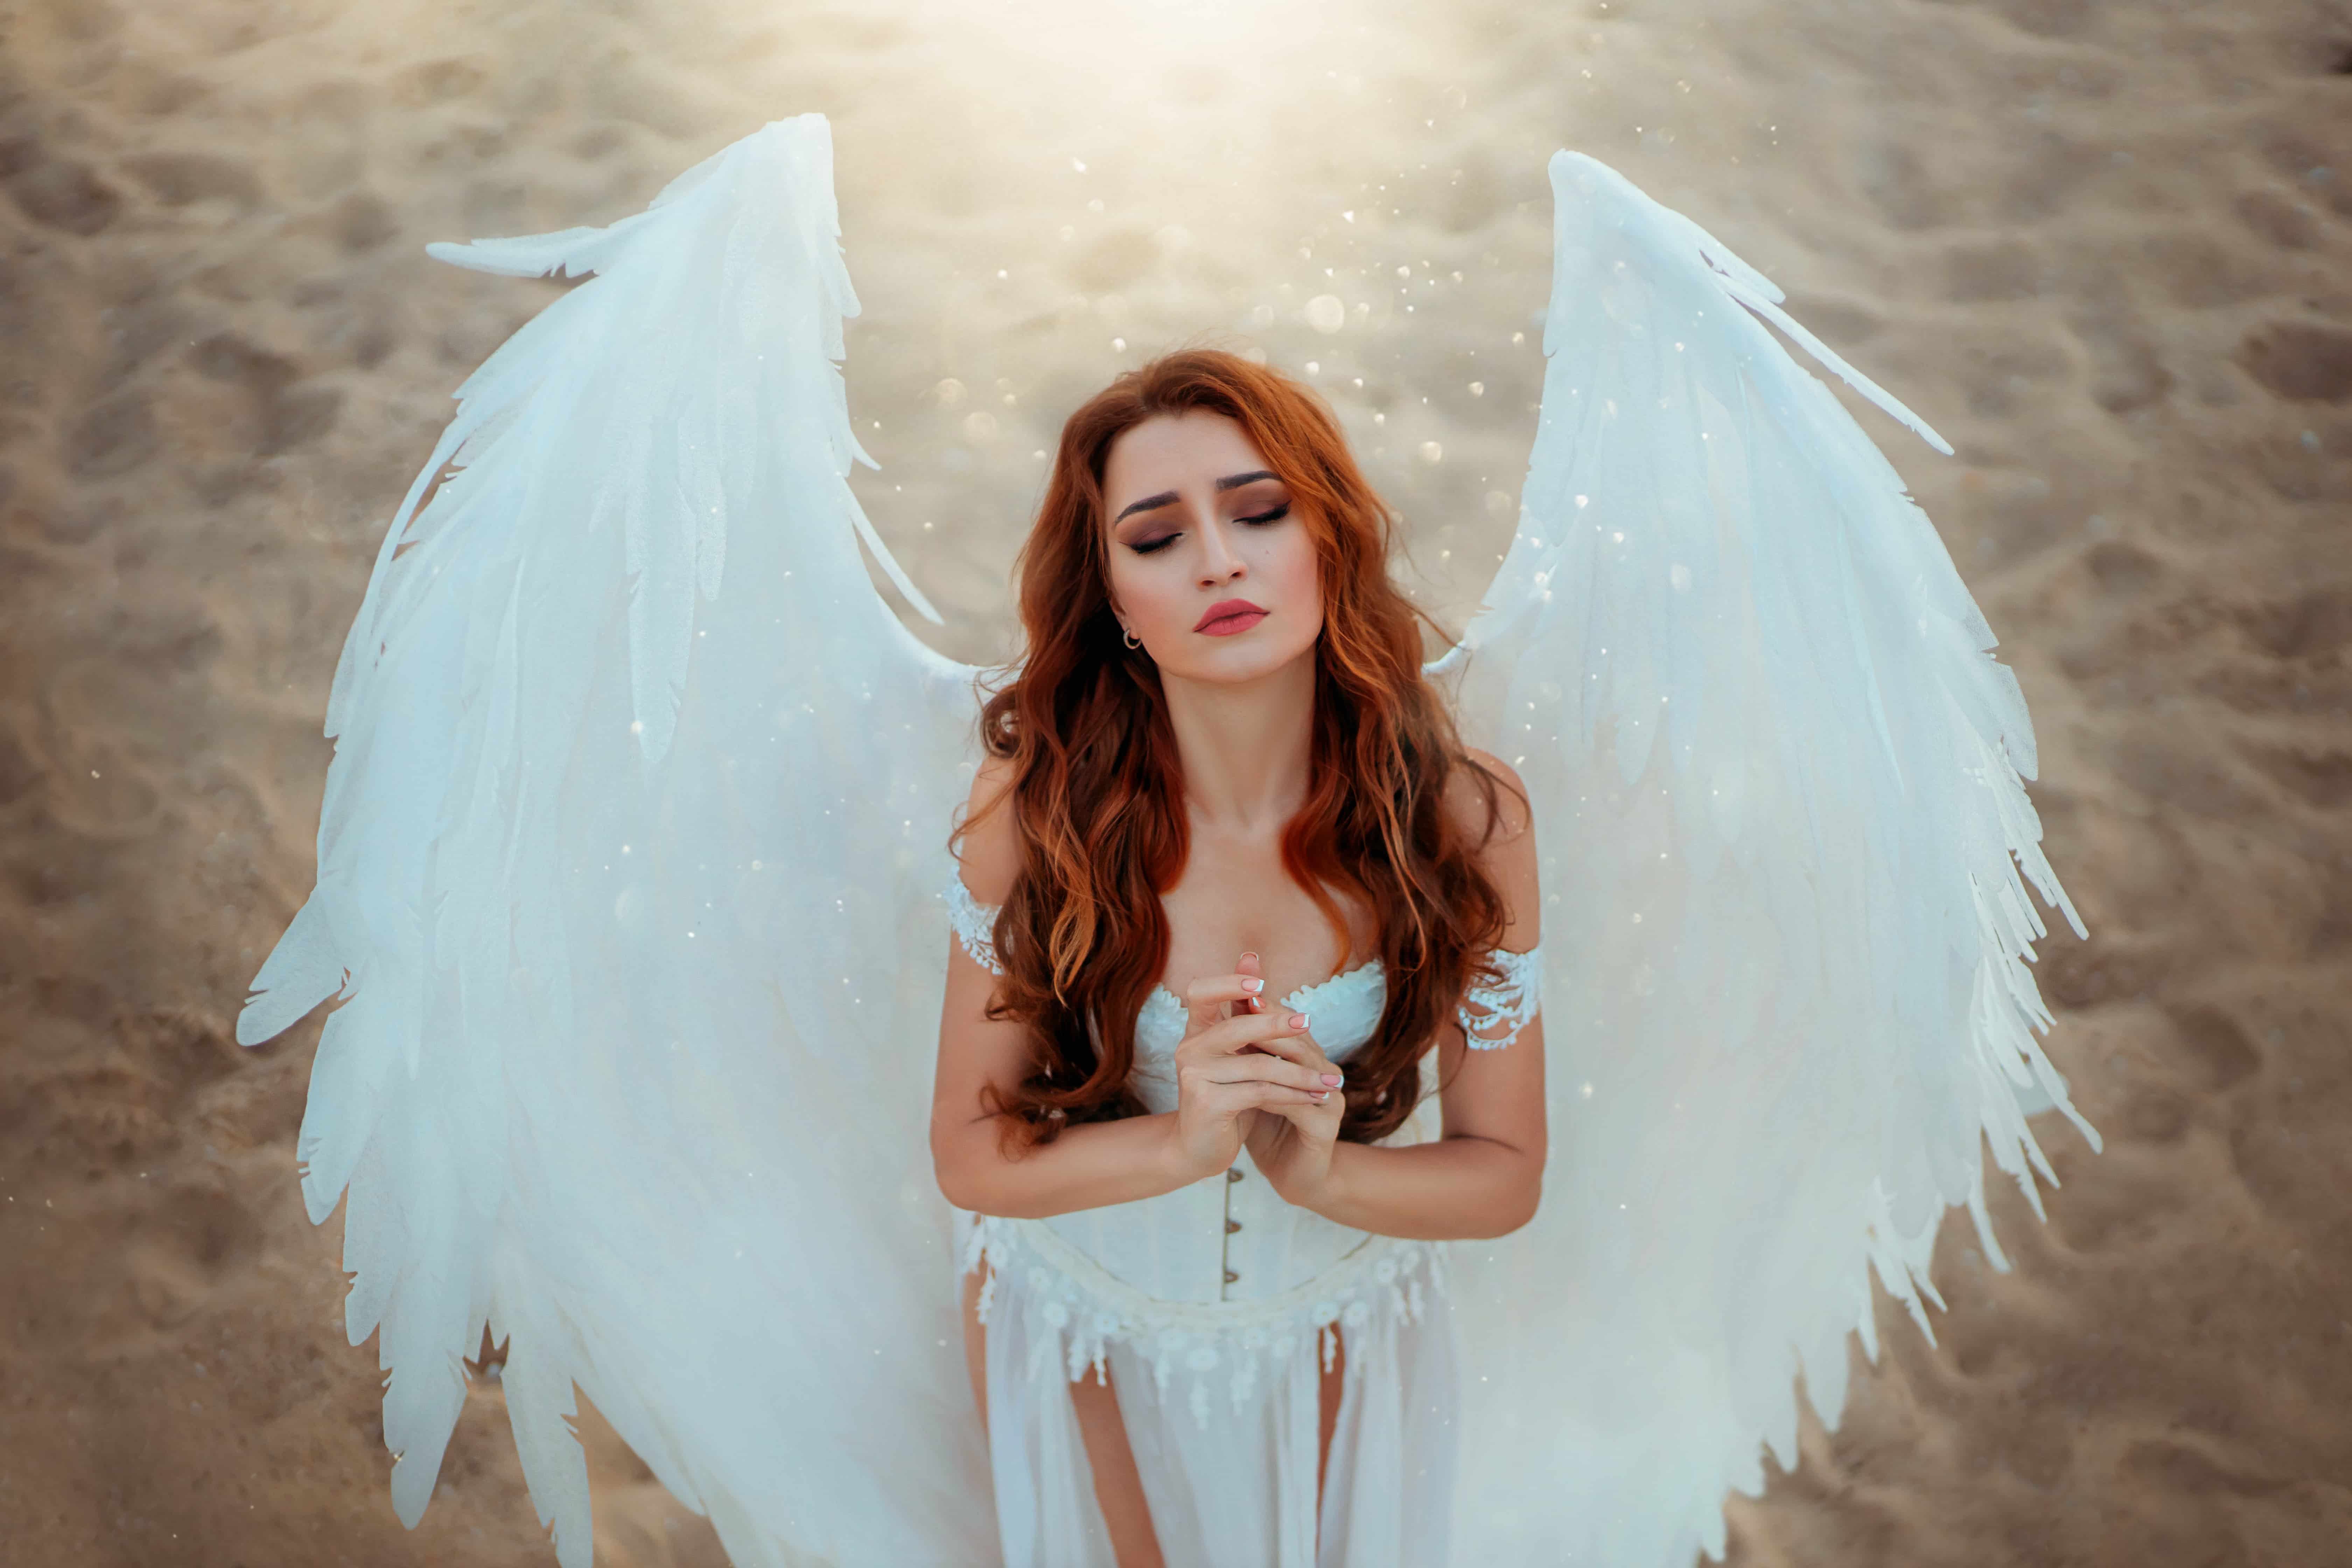 Fantasy woman in angel costume with white fake bird wings with artificial feather. Girl goddess with hands folded in prayer, closed eyes. Nature background beach, sand desert Divine blessing sun light.